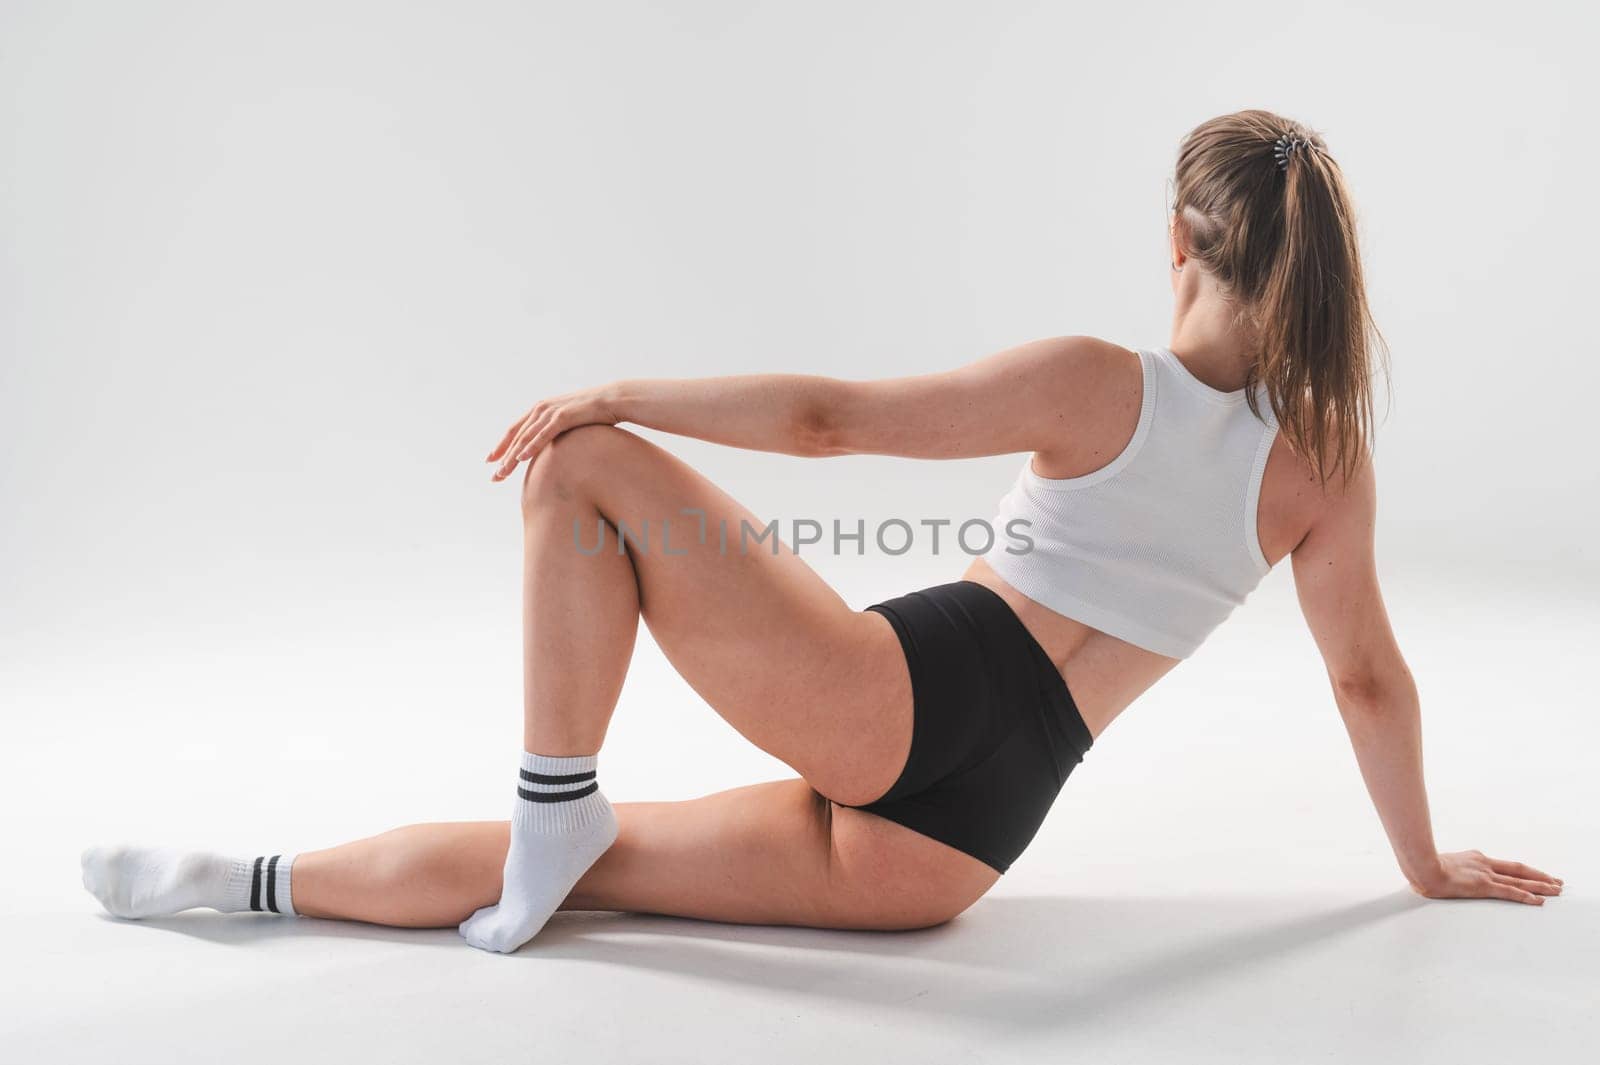 A woman in shorts sits with her back on a white floor. Beautiful butt